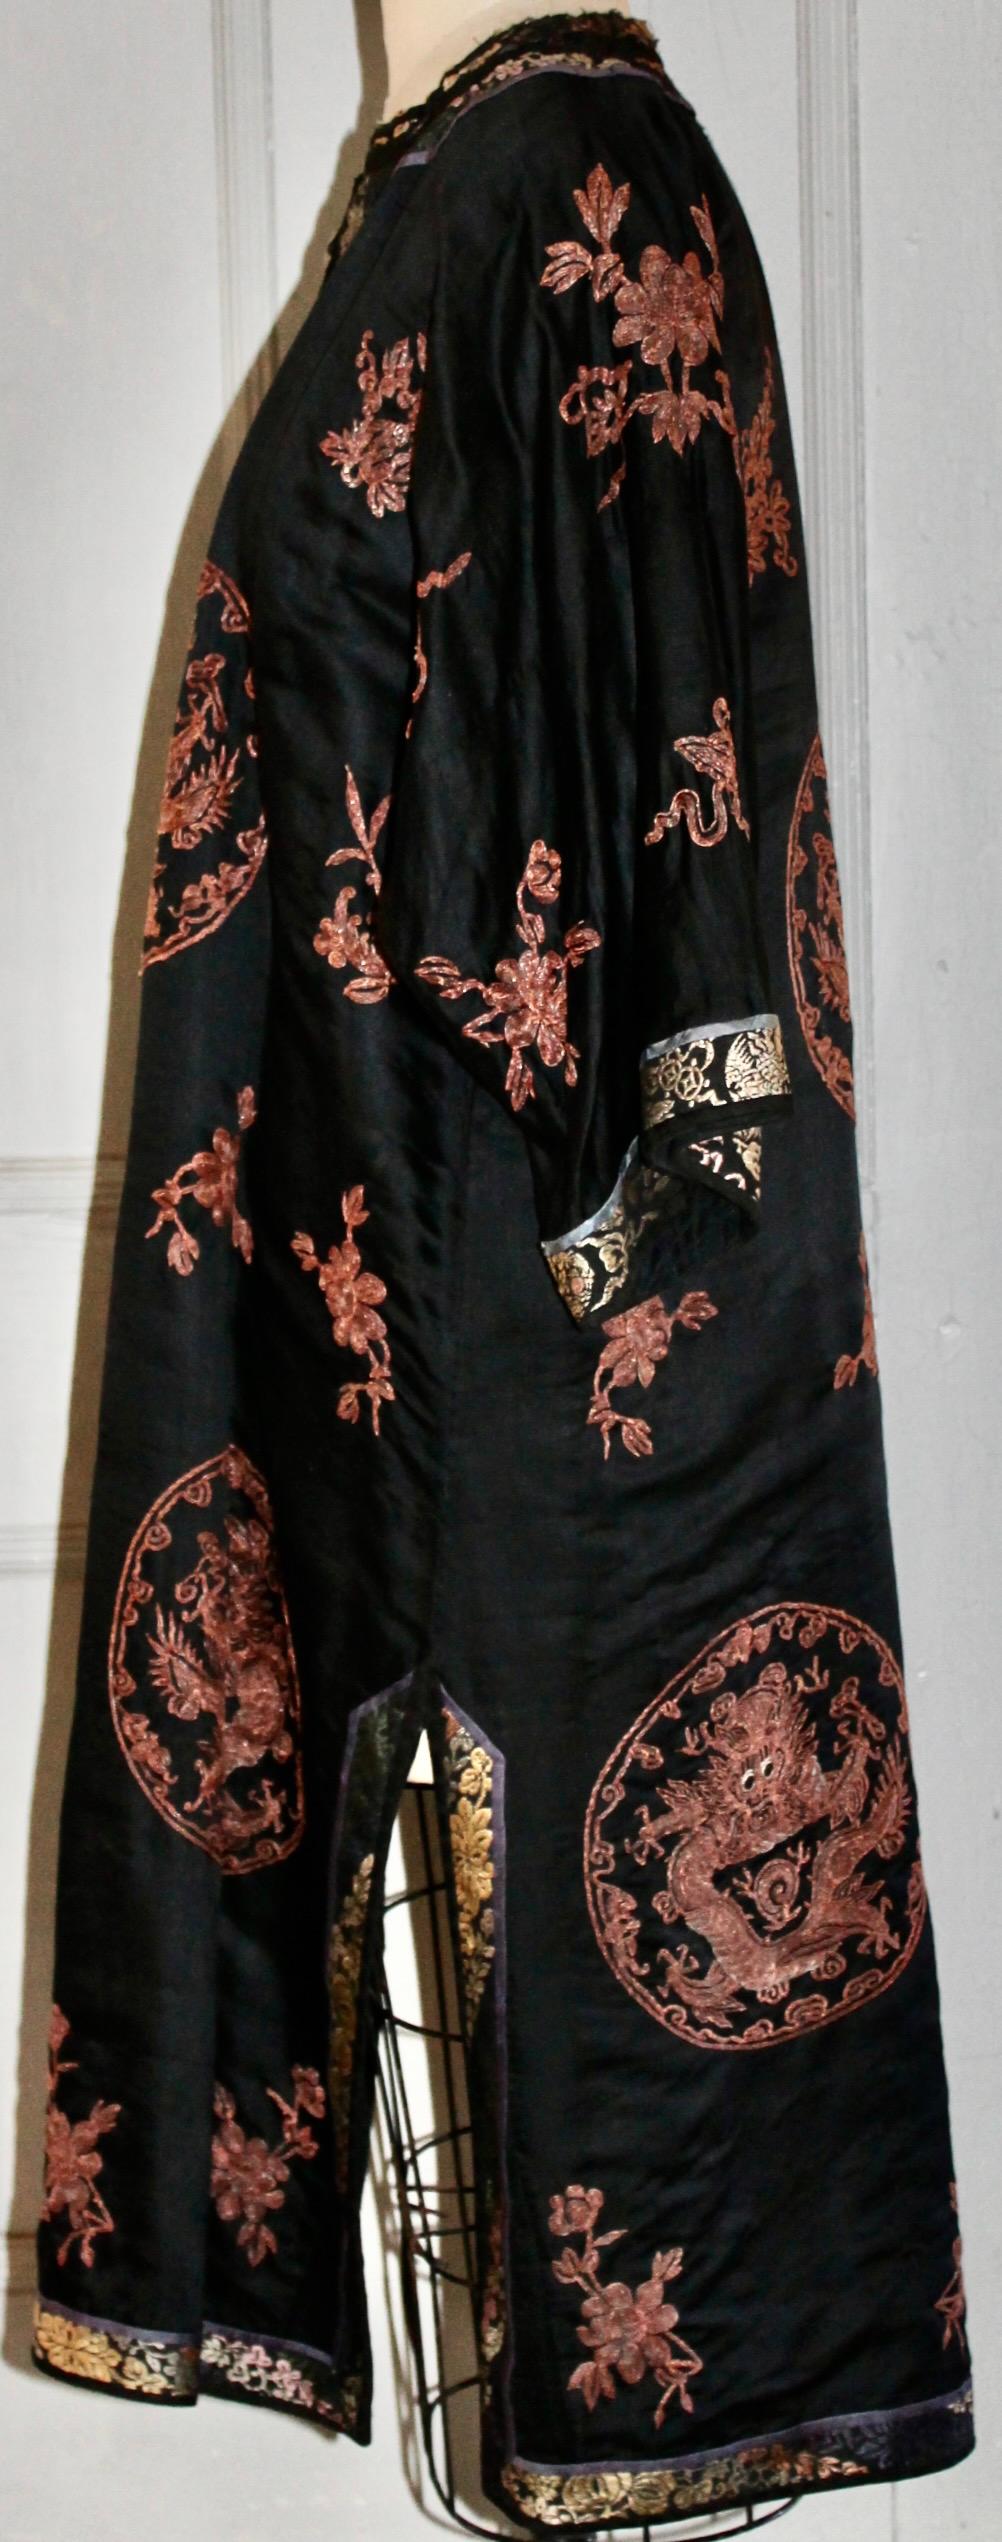 Women's Early 20th Century Chinese Robe with Metallic Dragon Embroidery For Sale